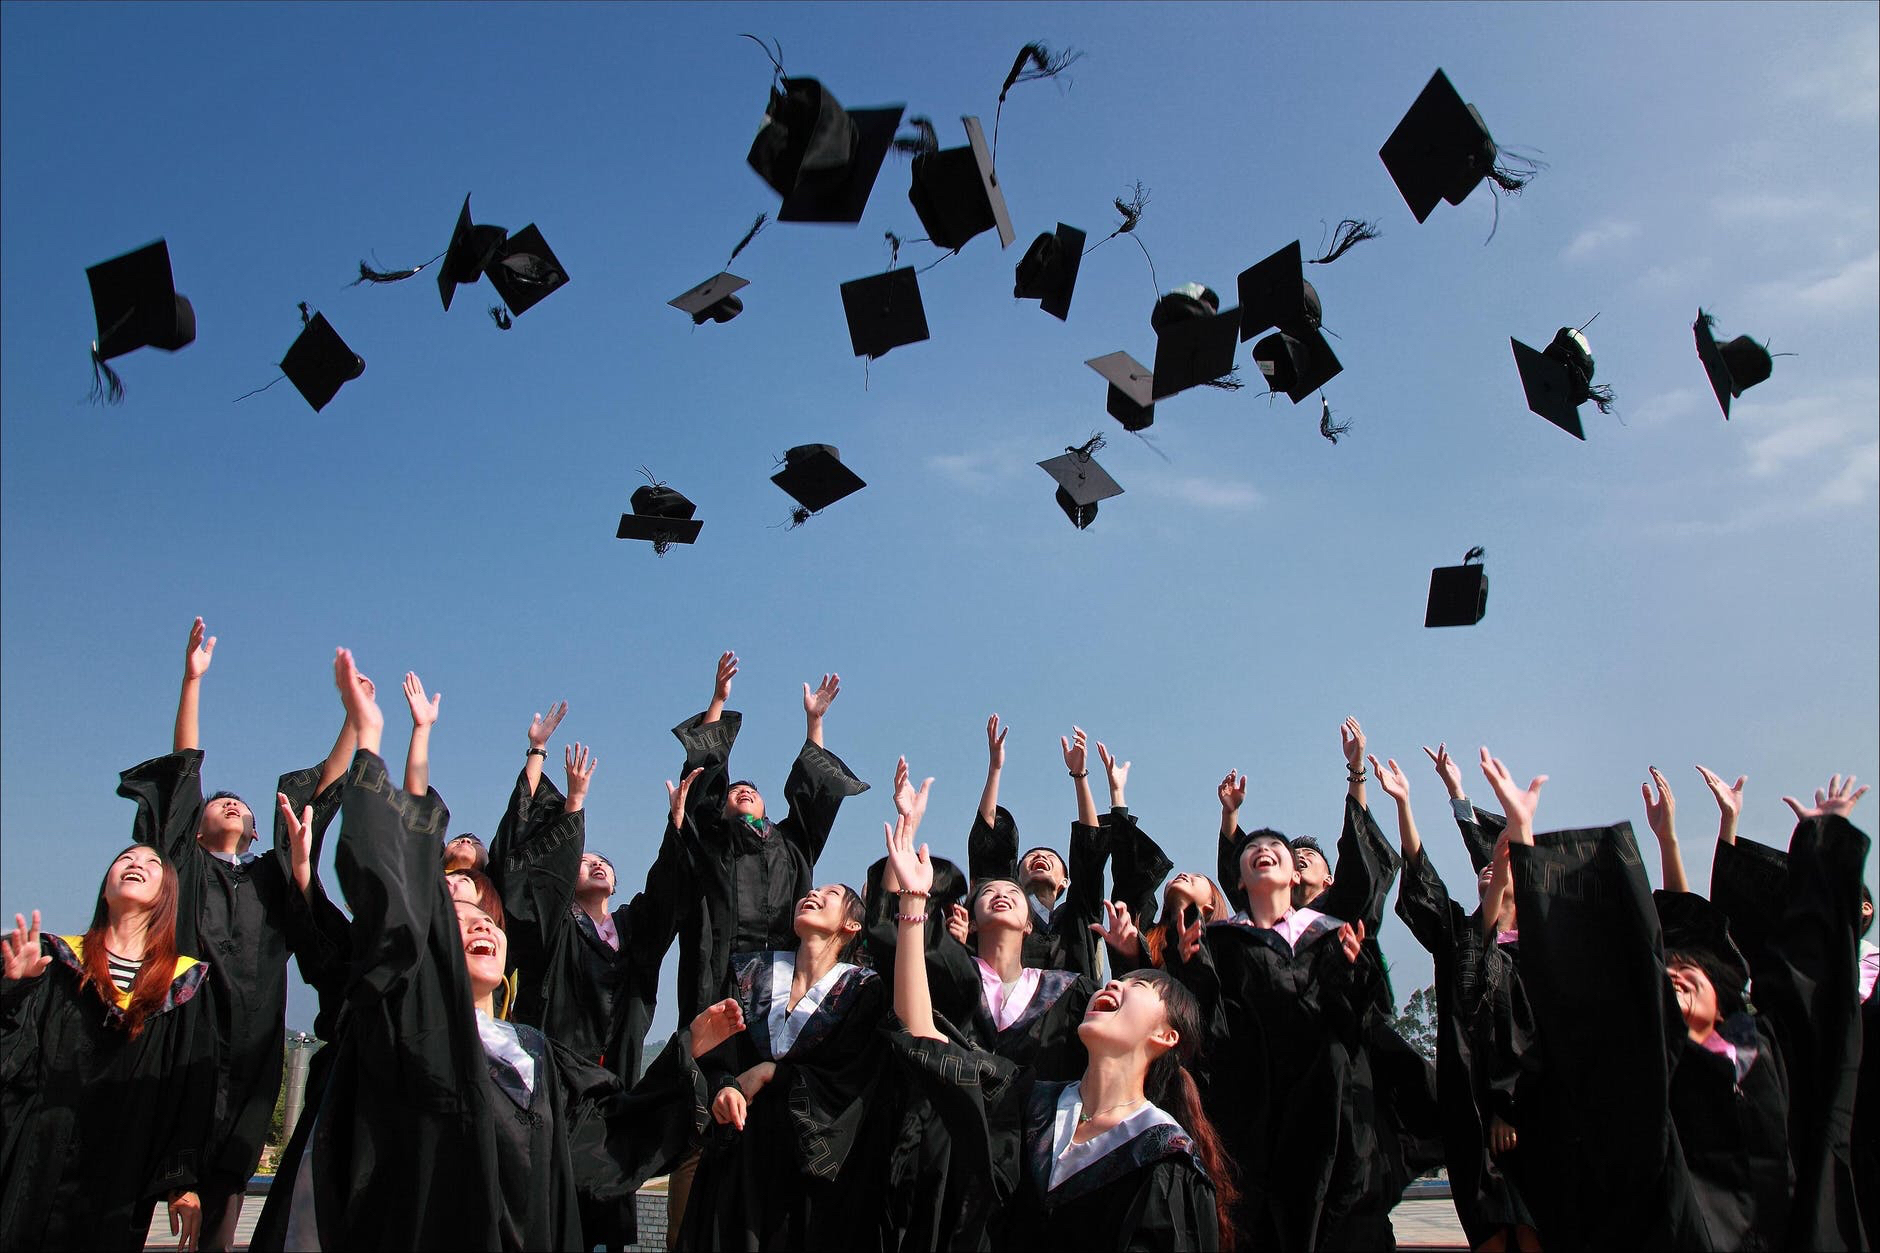 The history of the graduation cap - Graduation ceremonies are a tradition that dates back to the first high schools and universities. While many aspects of graduation ceremonies have evolved over the years, the graduation cap has remained a hallmark of such ceremonies.